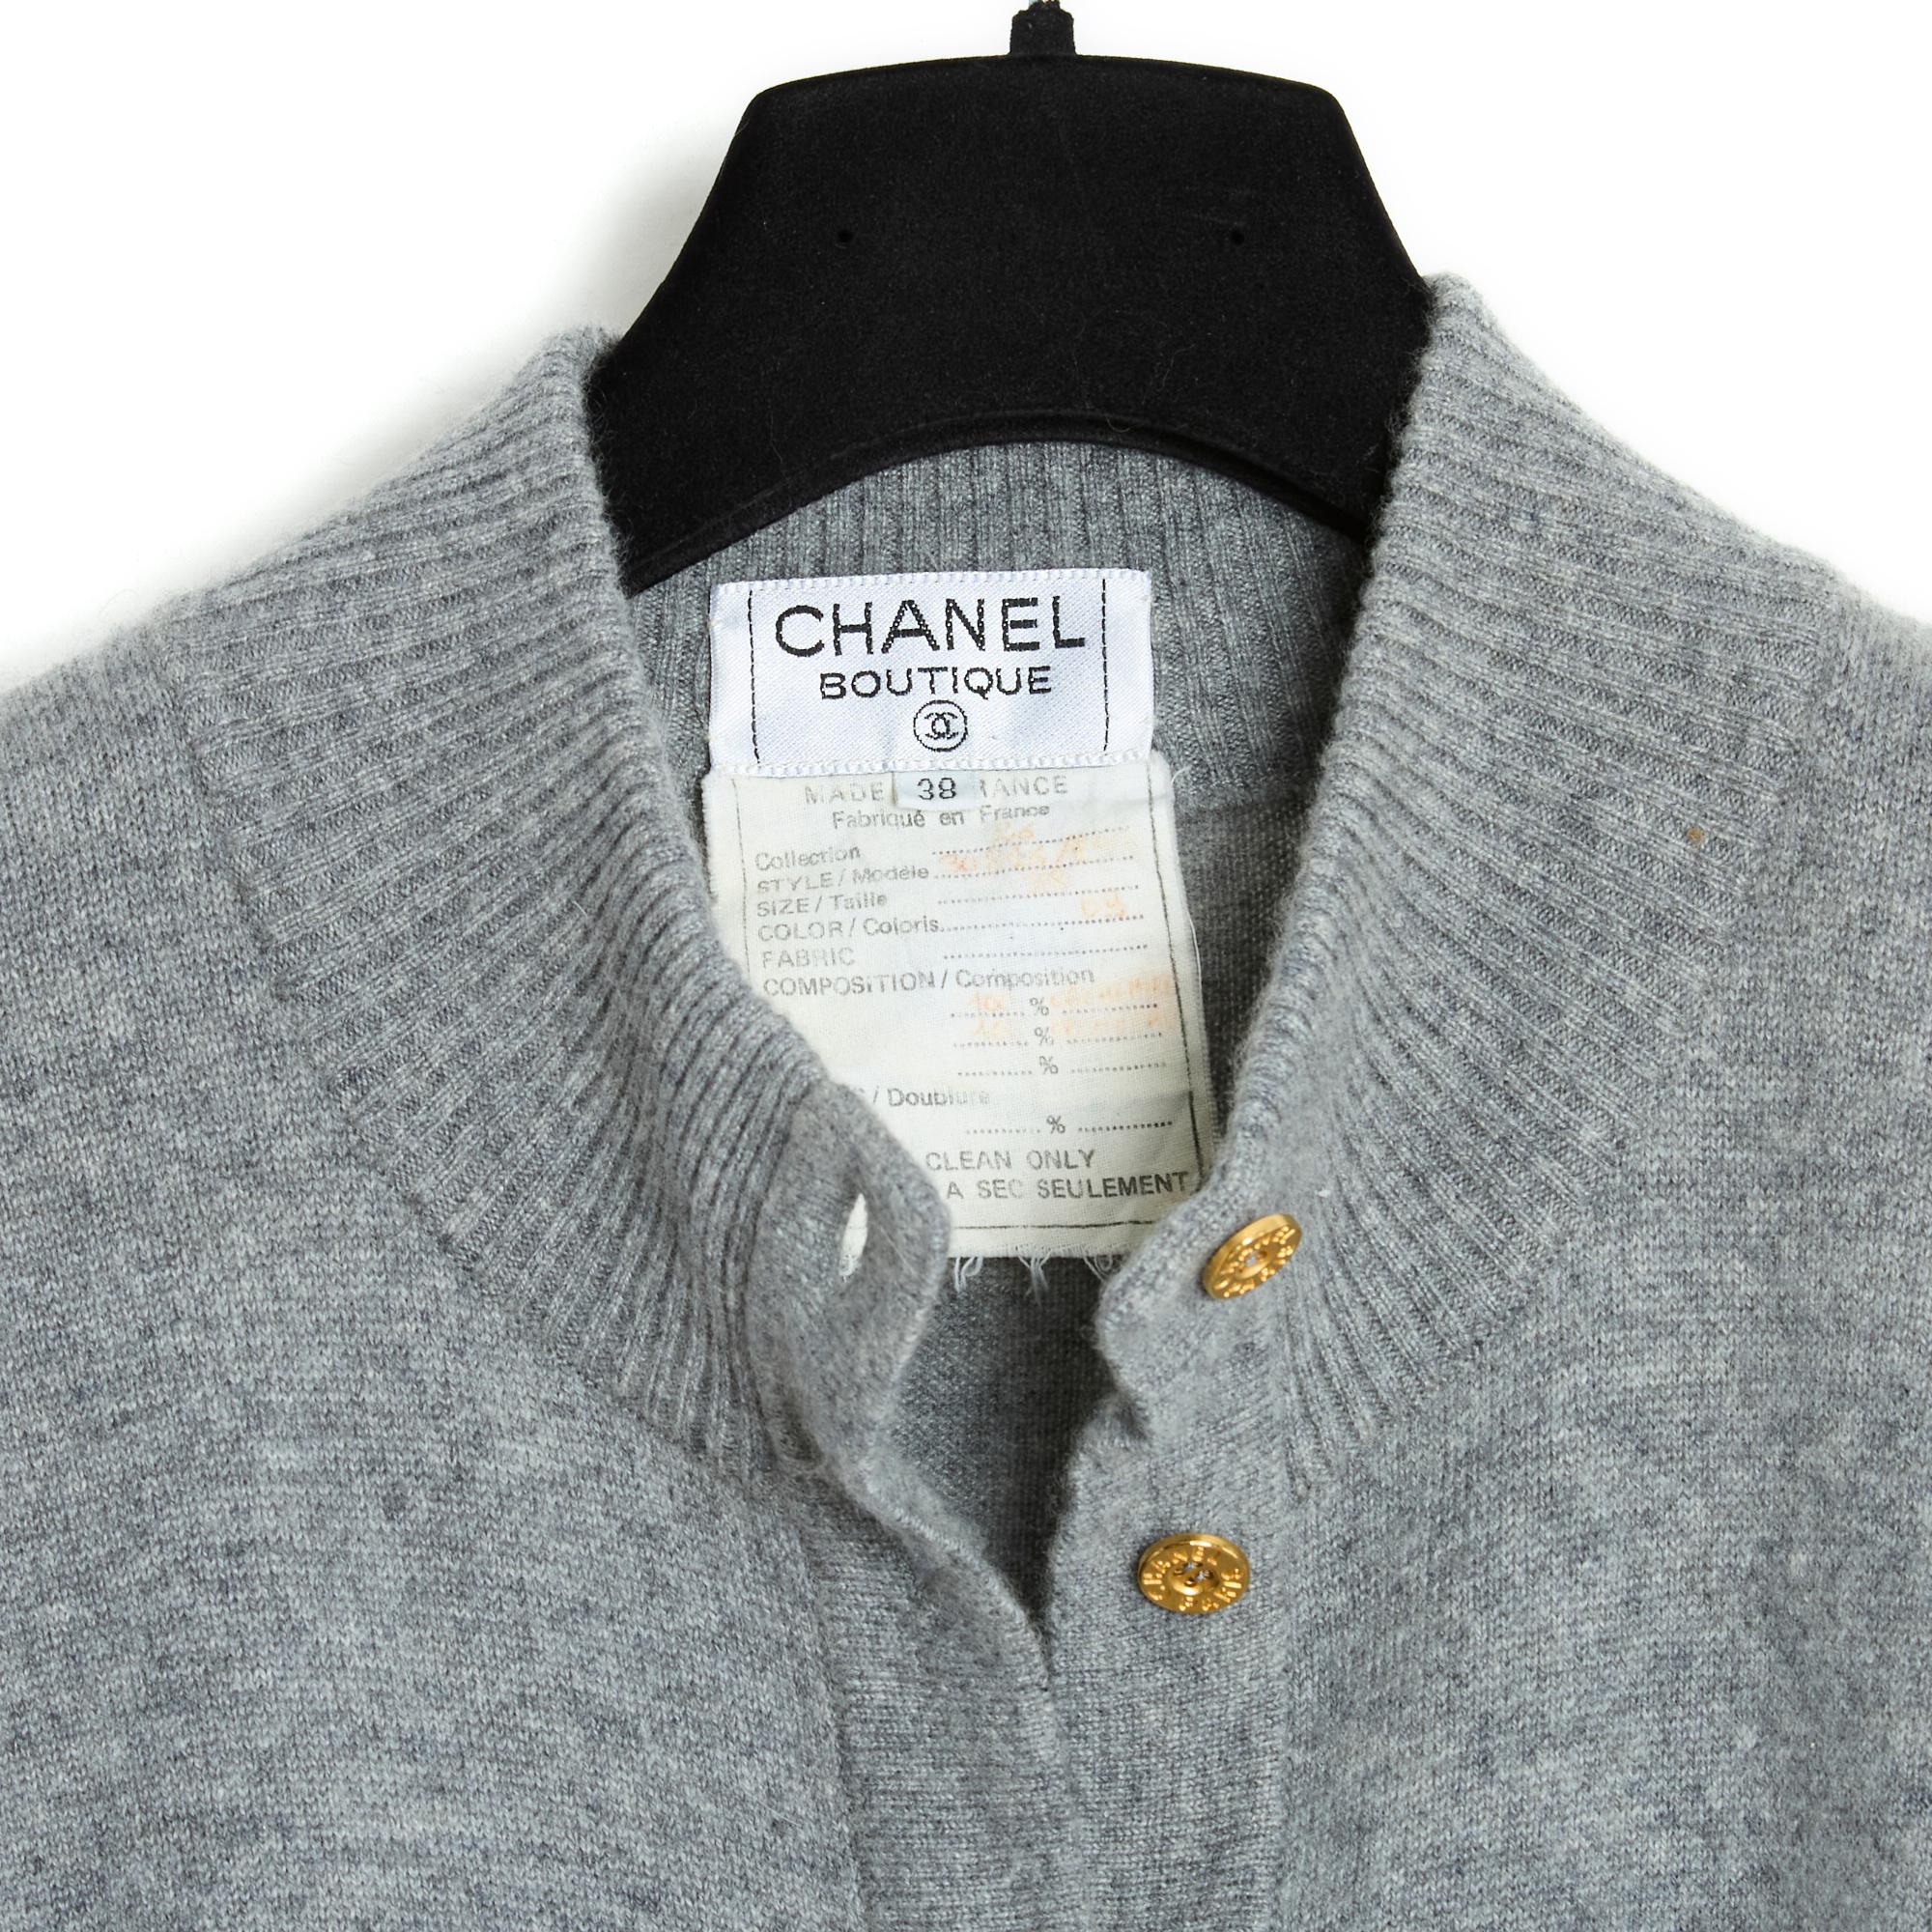 FW1991 Chanel Iconic Grey Cashmere Jumpsuit FR38/40 Pristine For Sale 2